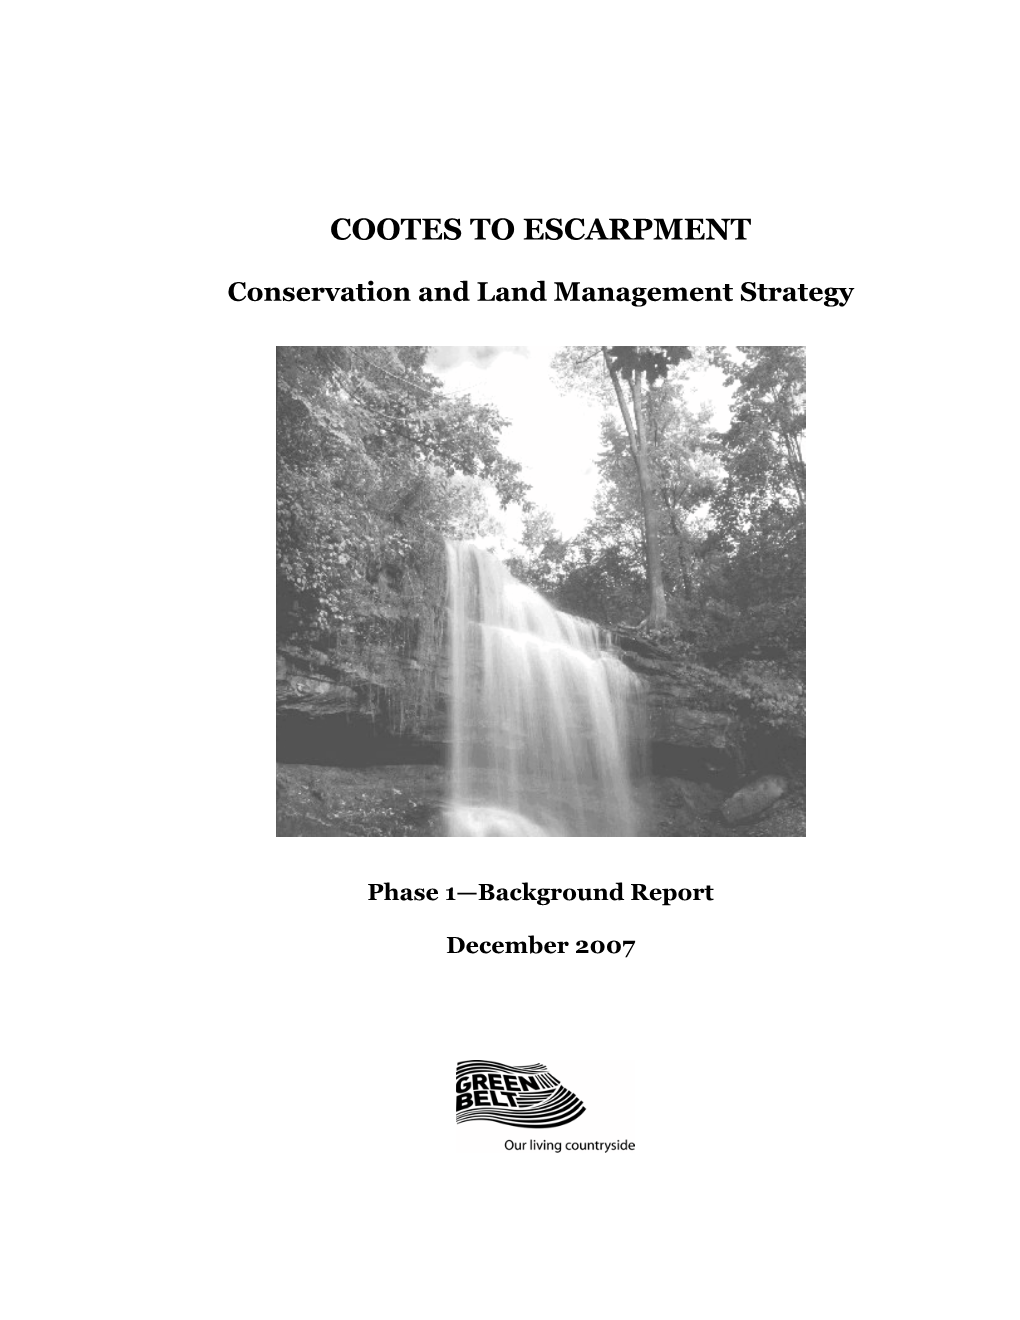 To Download the Cootes to Escarpment Park System